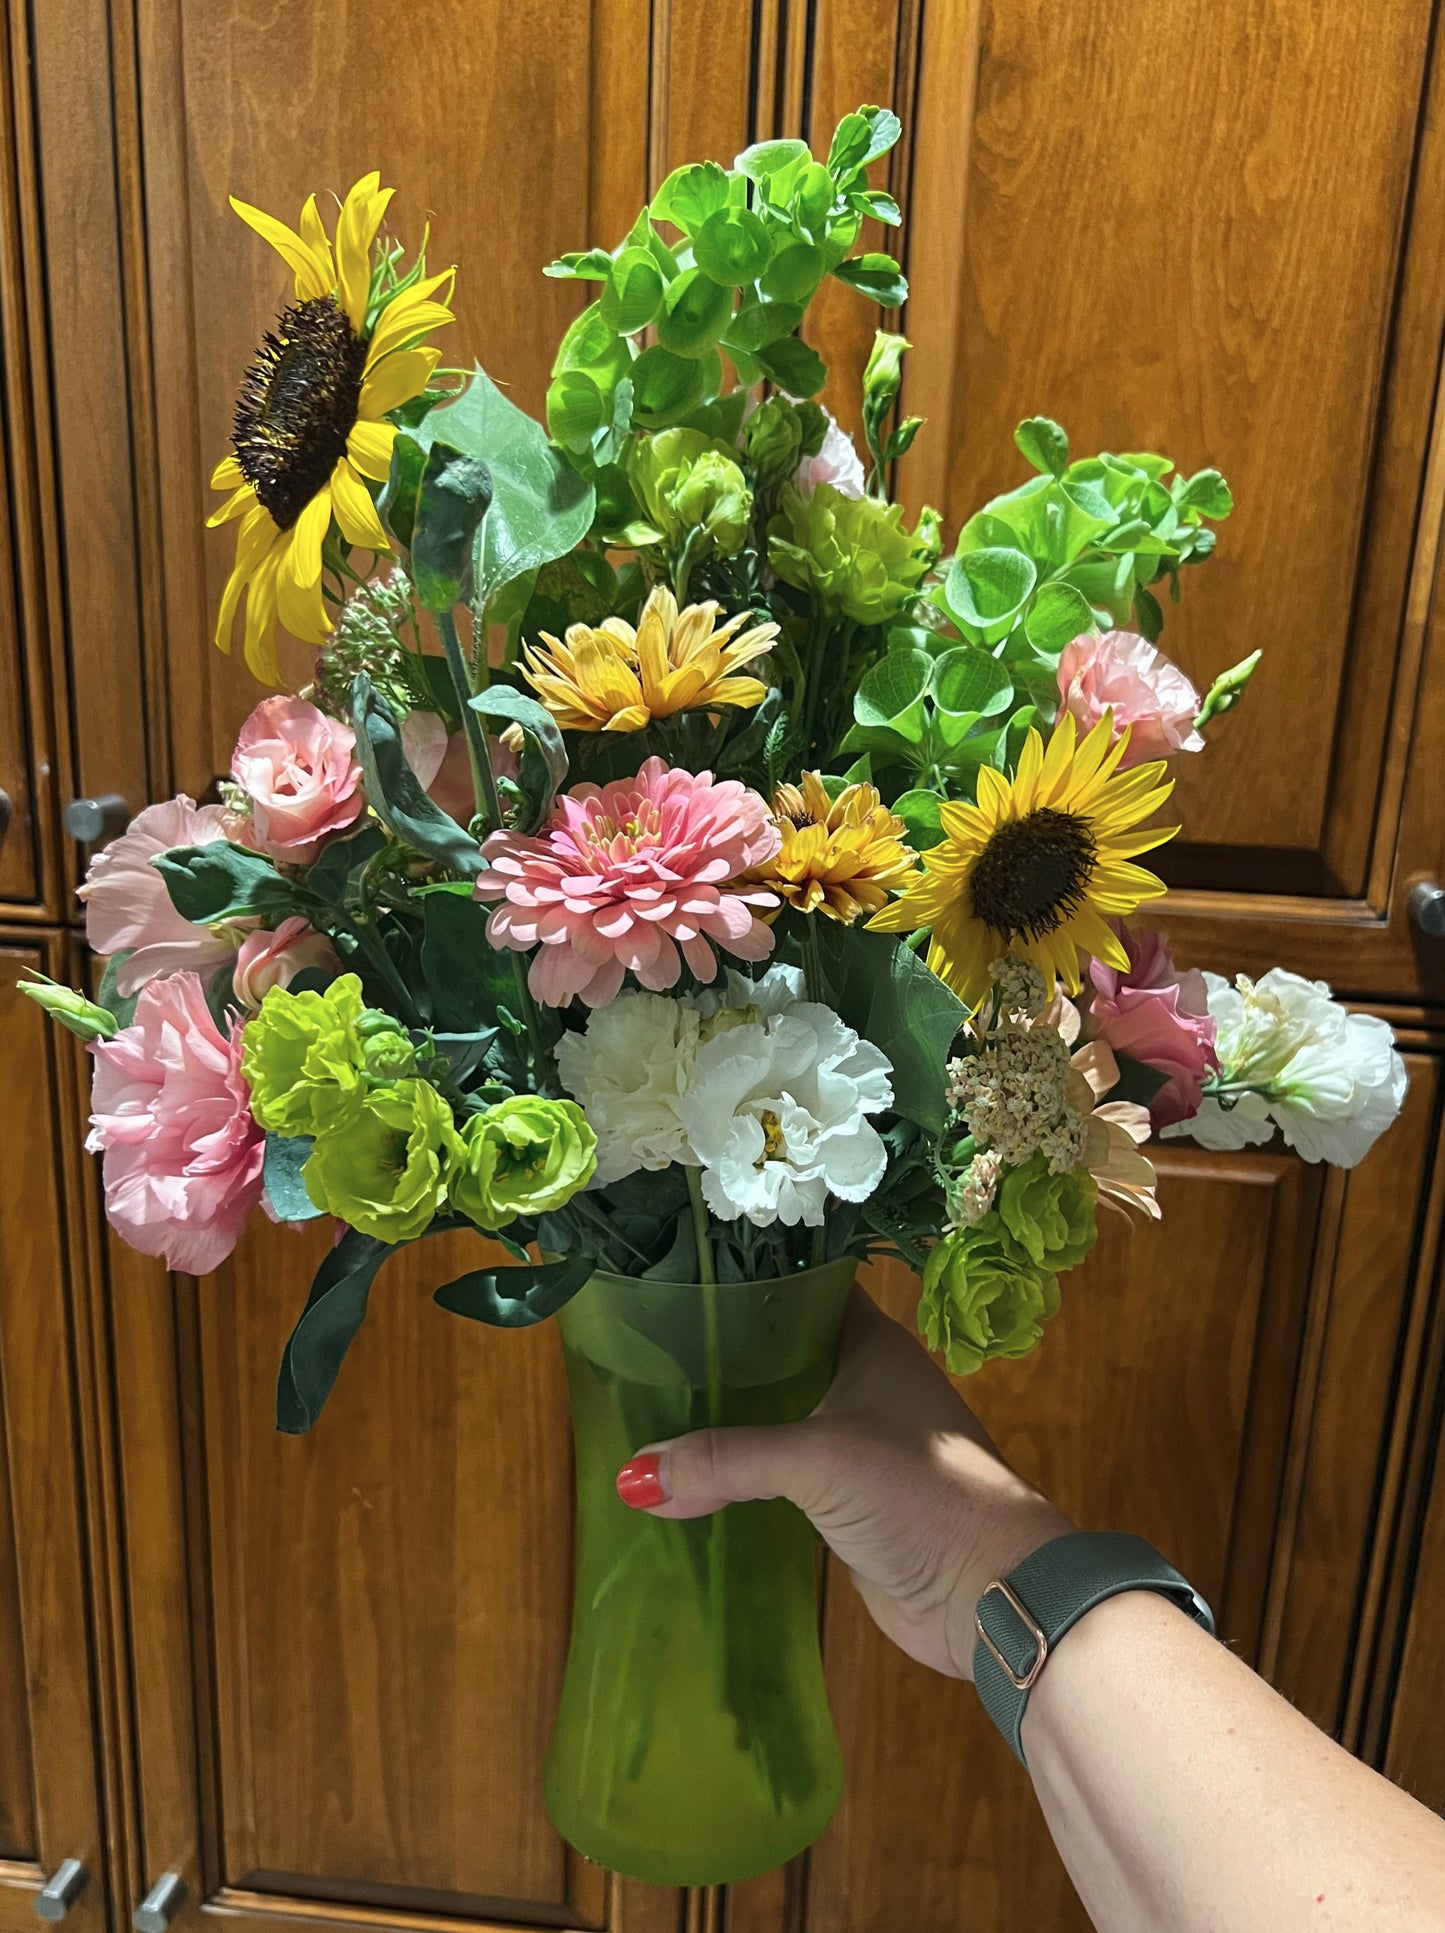 An example of a large early summer bouquet with sunflowers, lisianthus, rudbeckis, zinnias and bells of ireland